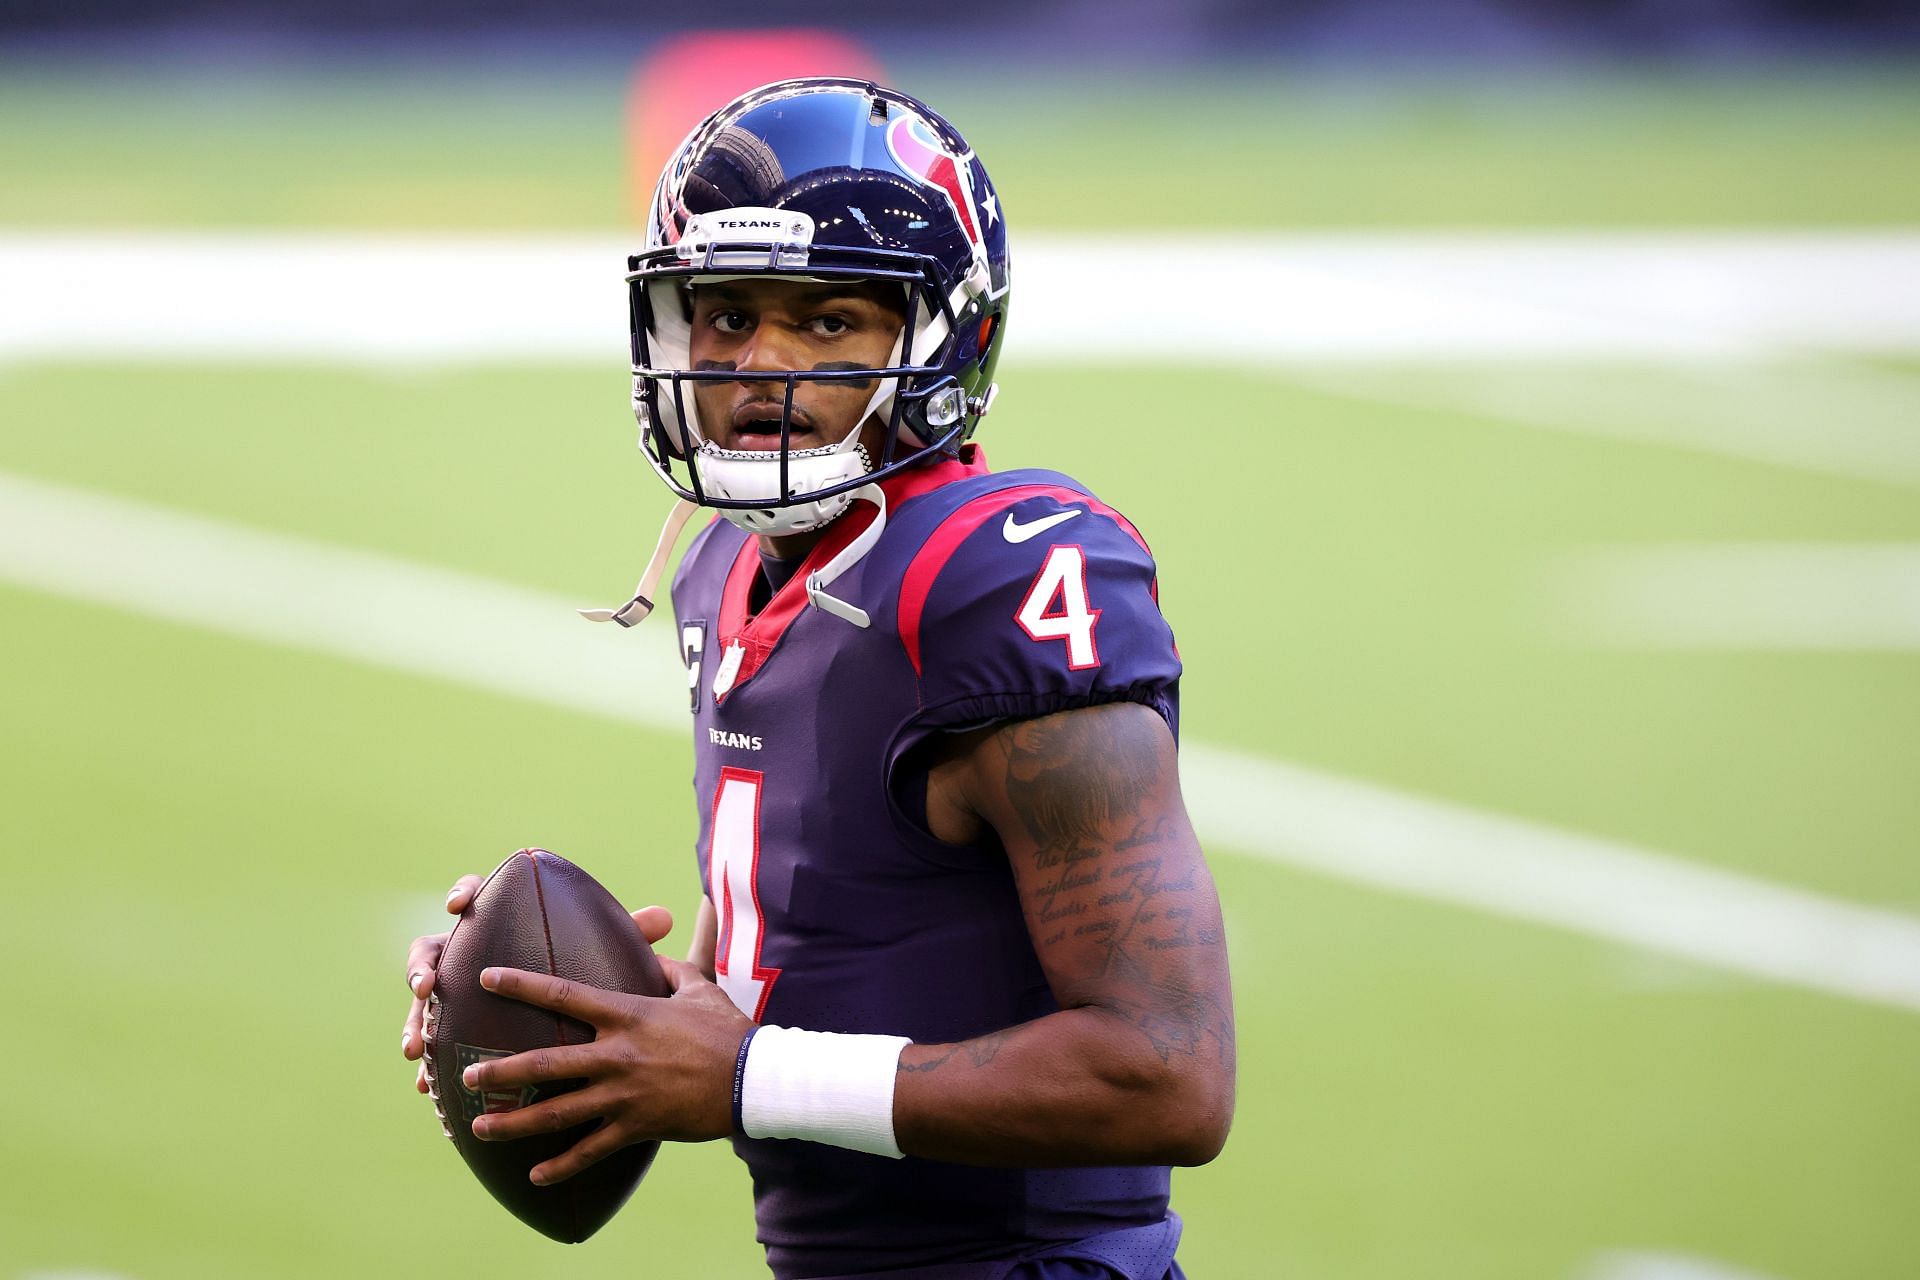 Watson suiting up for the Texans